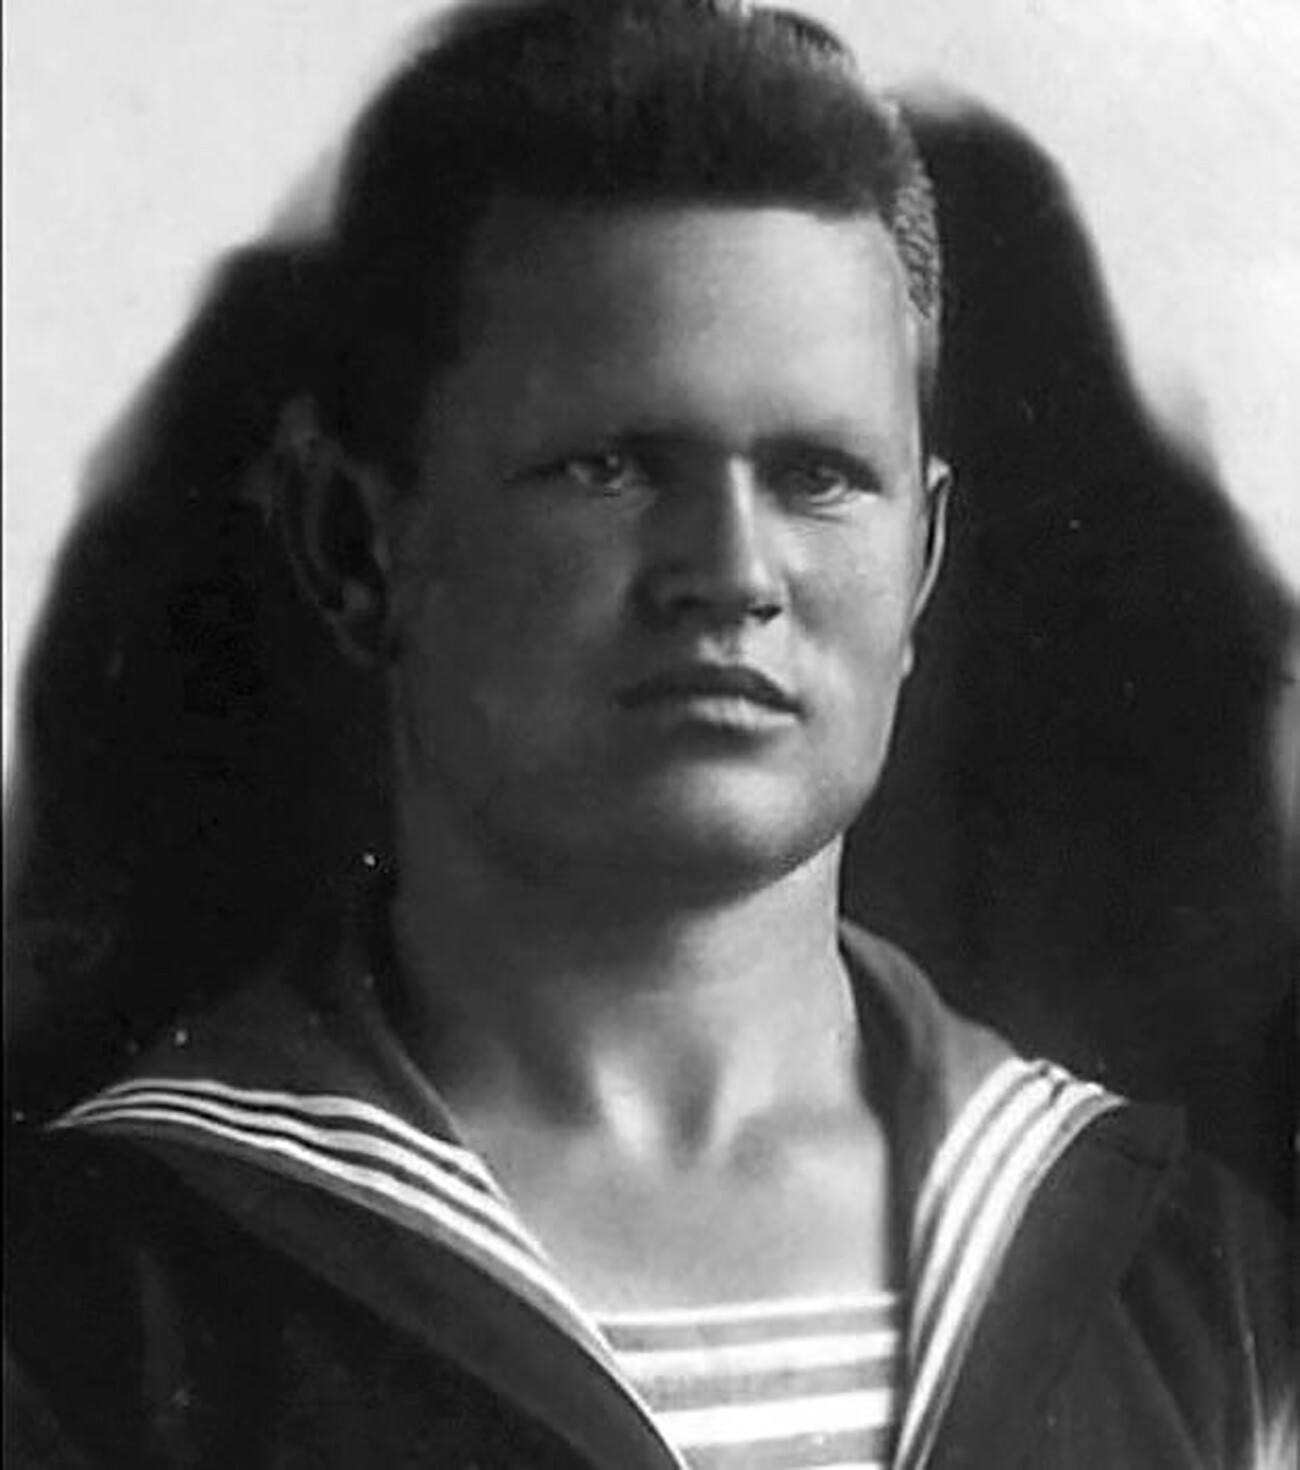 Vasily Zaitsev during his service in the Pacific Fleet.